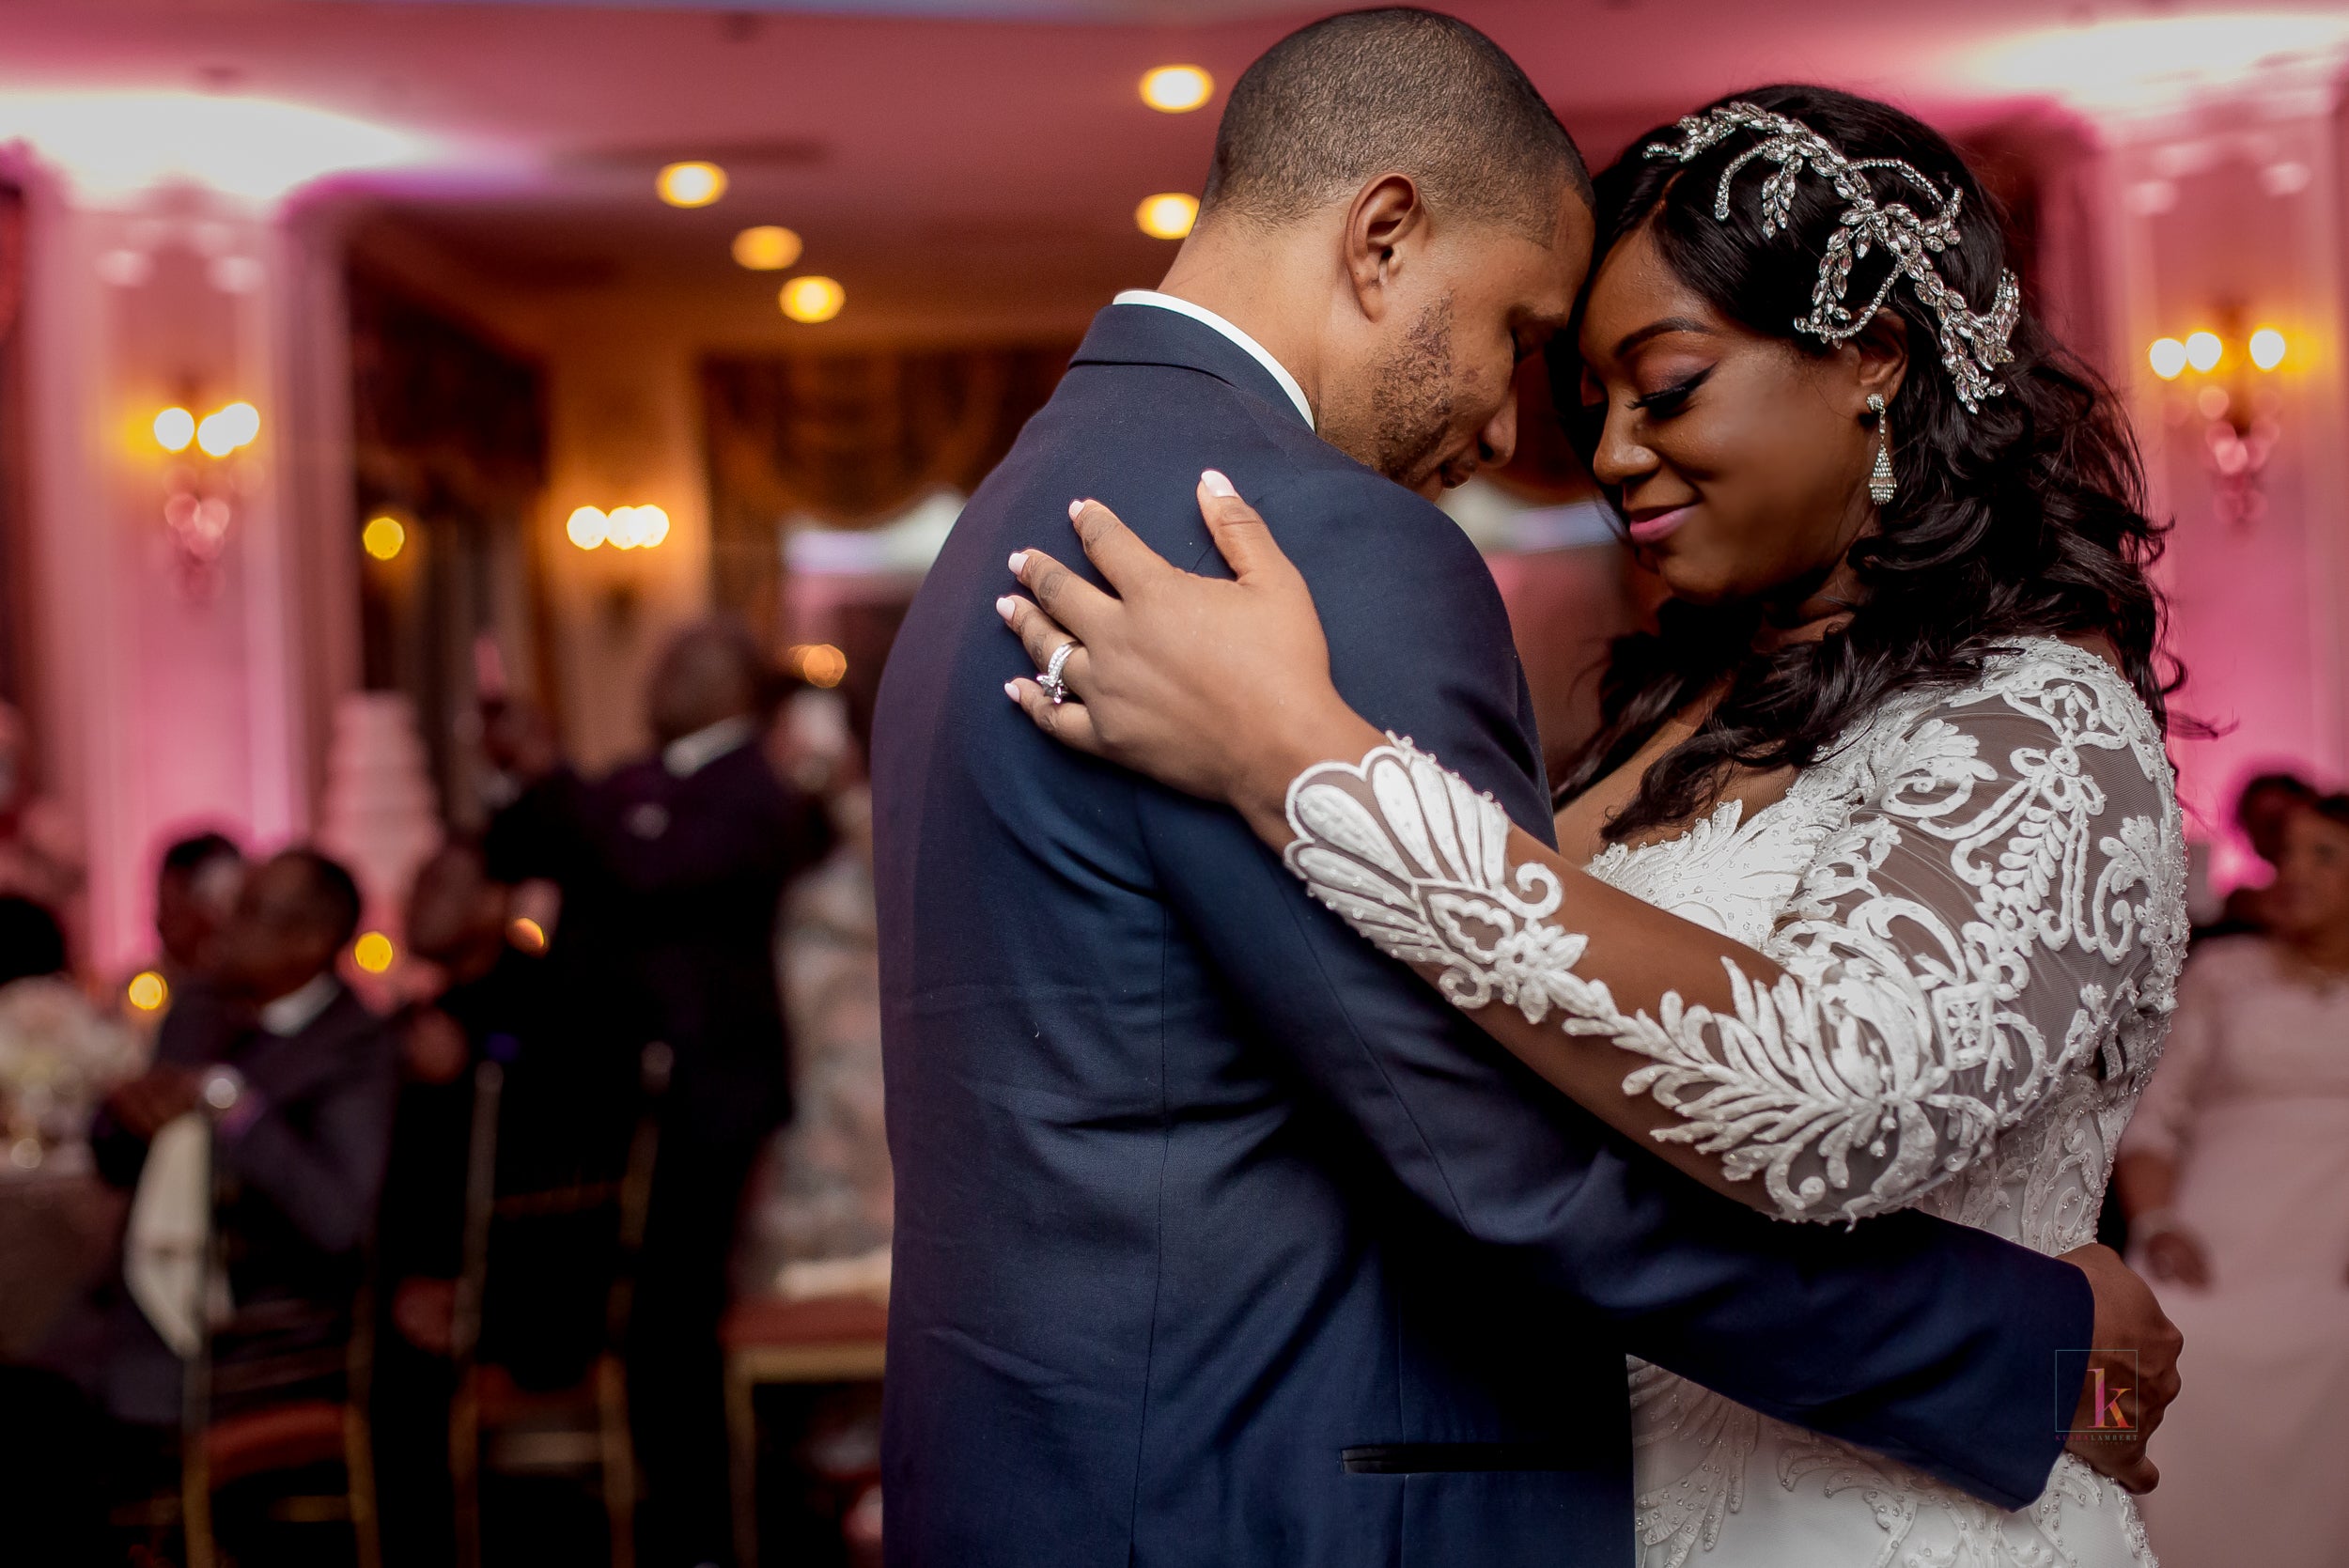 Al Sharpton's Daughter Married The Man Of Her Dreams In A Public And Love-Filled Ceremony
